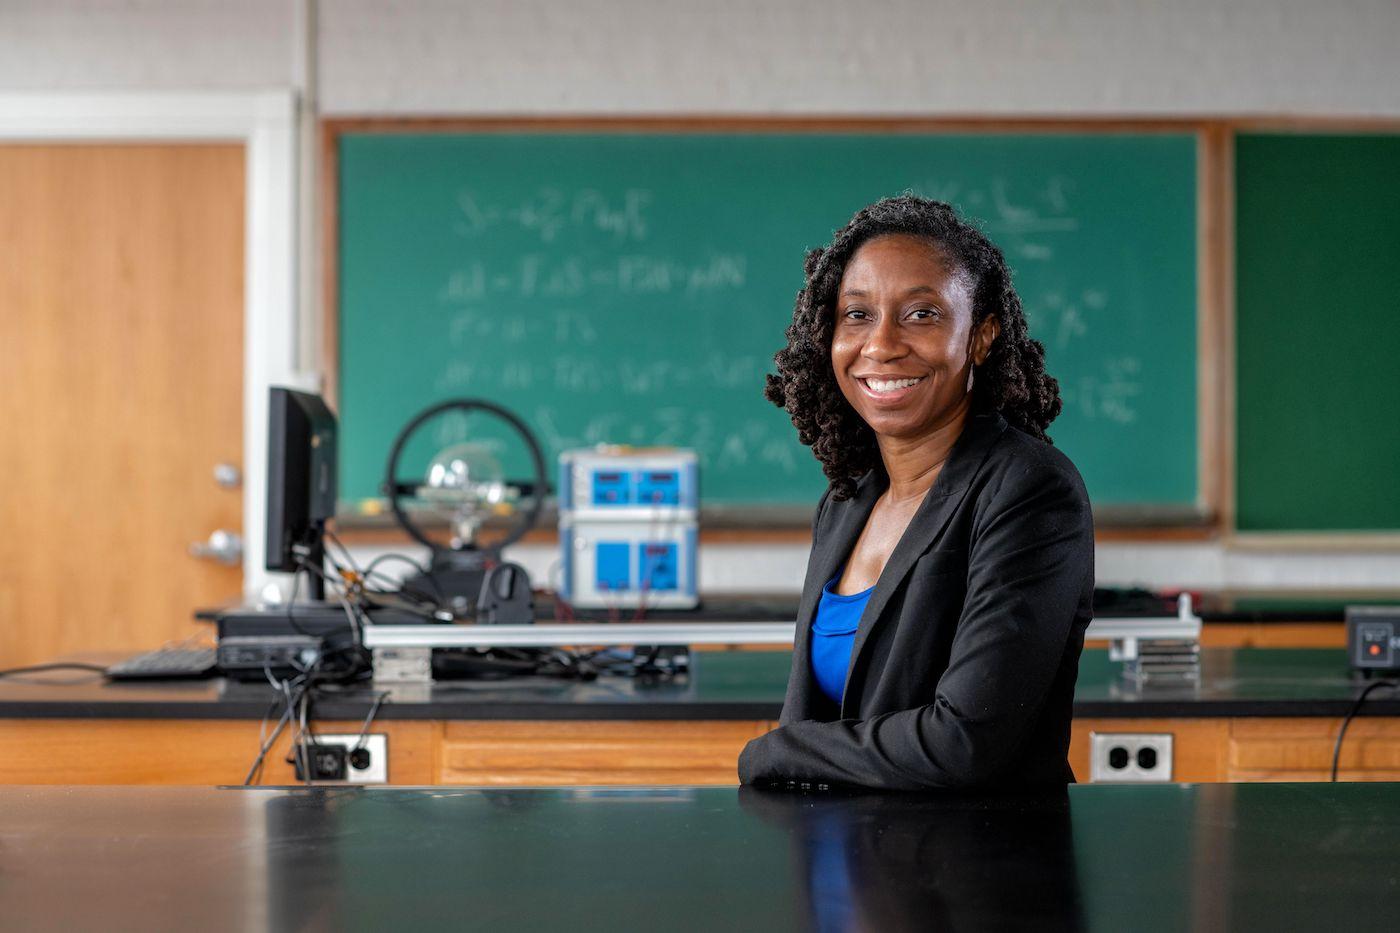 Kenisha Ford leaning against a lab table in a classroom